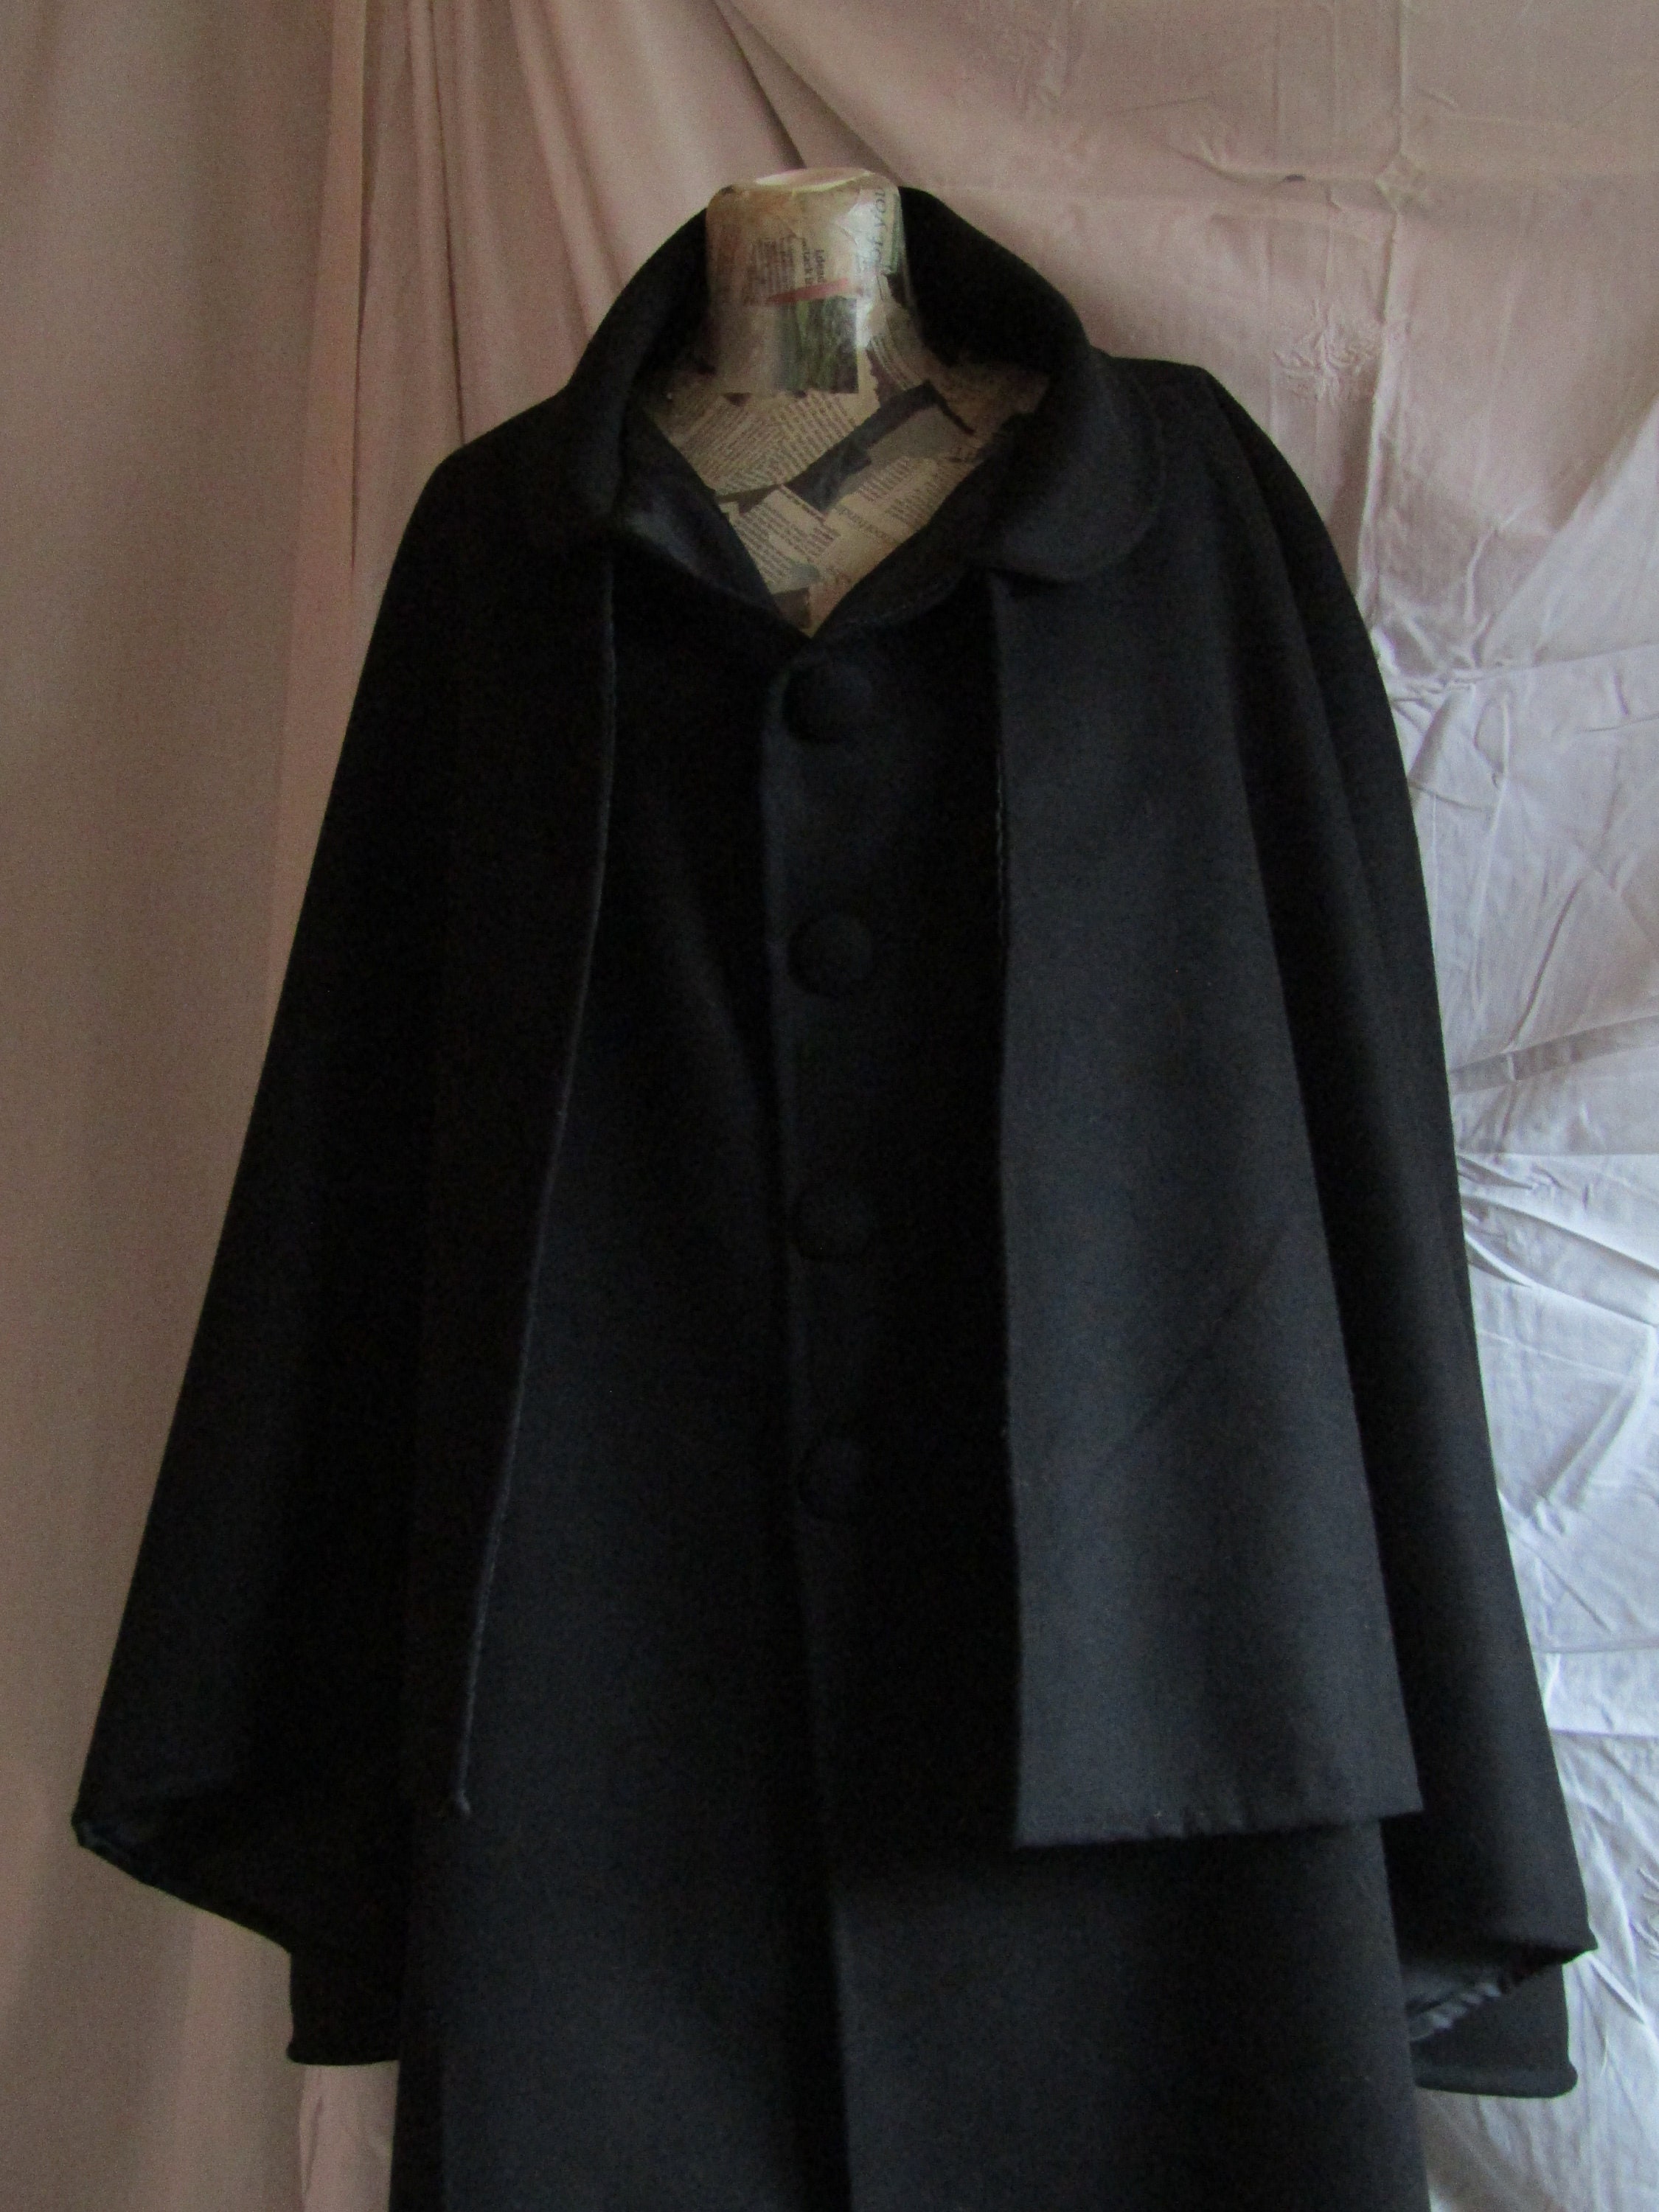 Black Wool Polyester Inverness/ulster 1850s Overcoat/cape. | Etsy UK